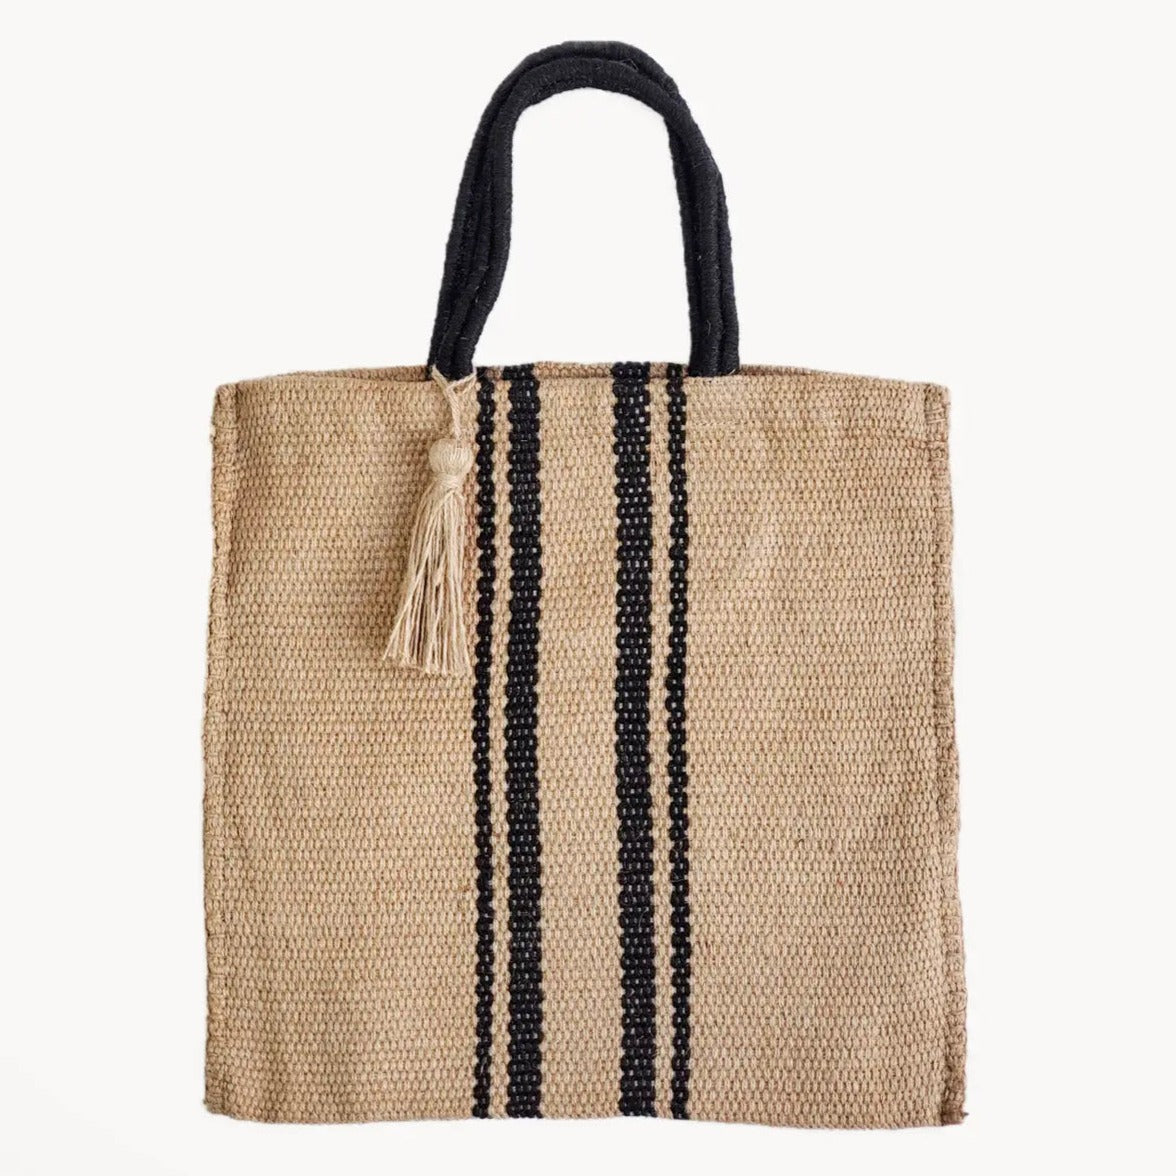 Special handmade jute bag for all your purposes || Rural Handmade-Redefine  Supply to Build Sustainable Brands